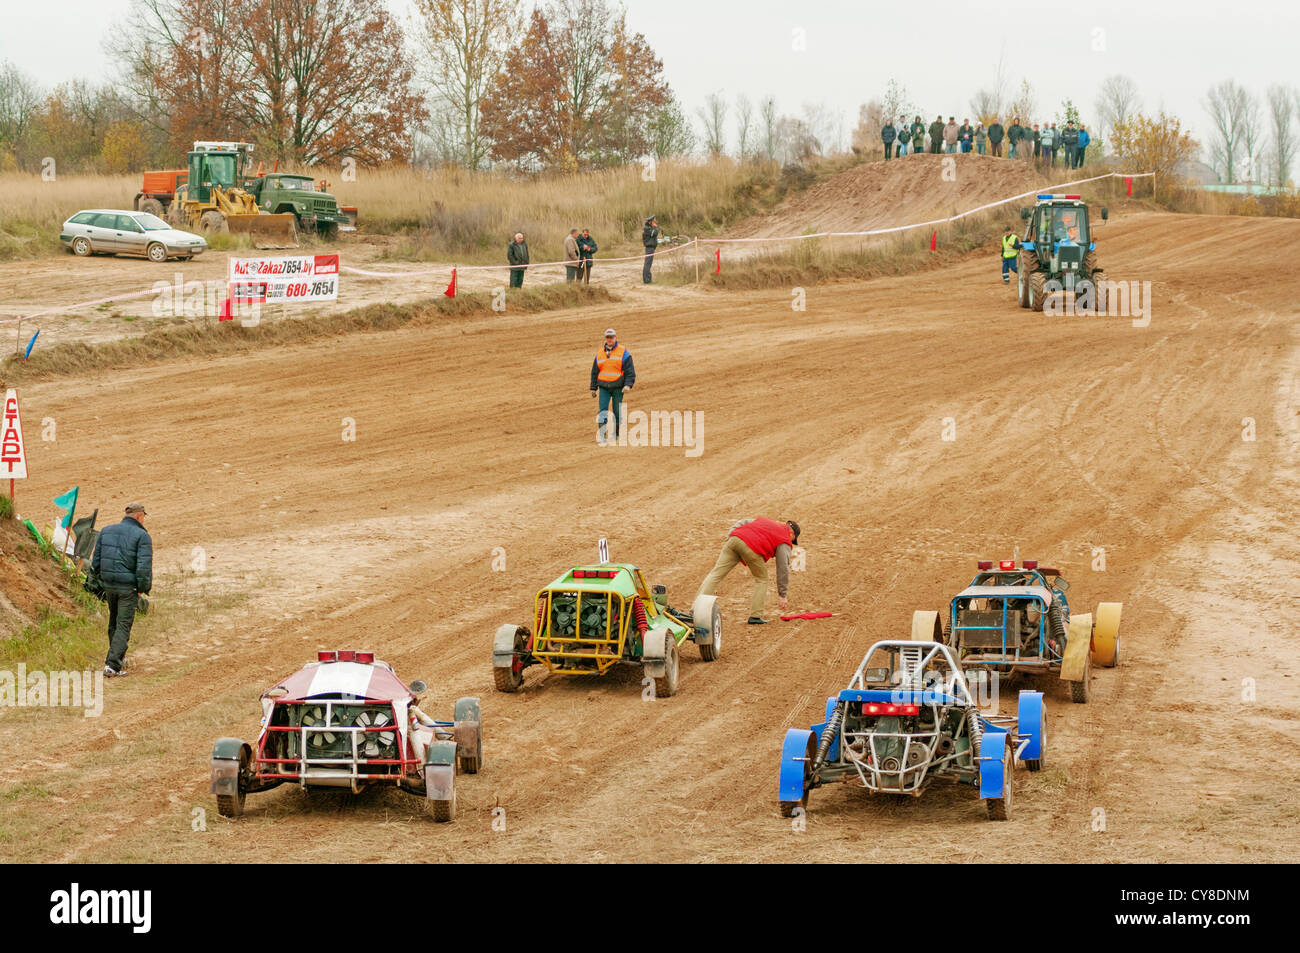 Small buggy test race. Stock Photo